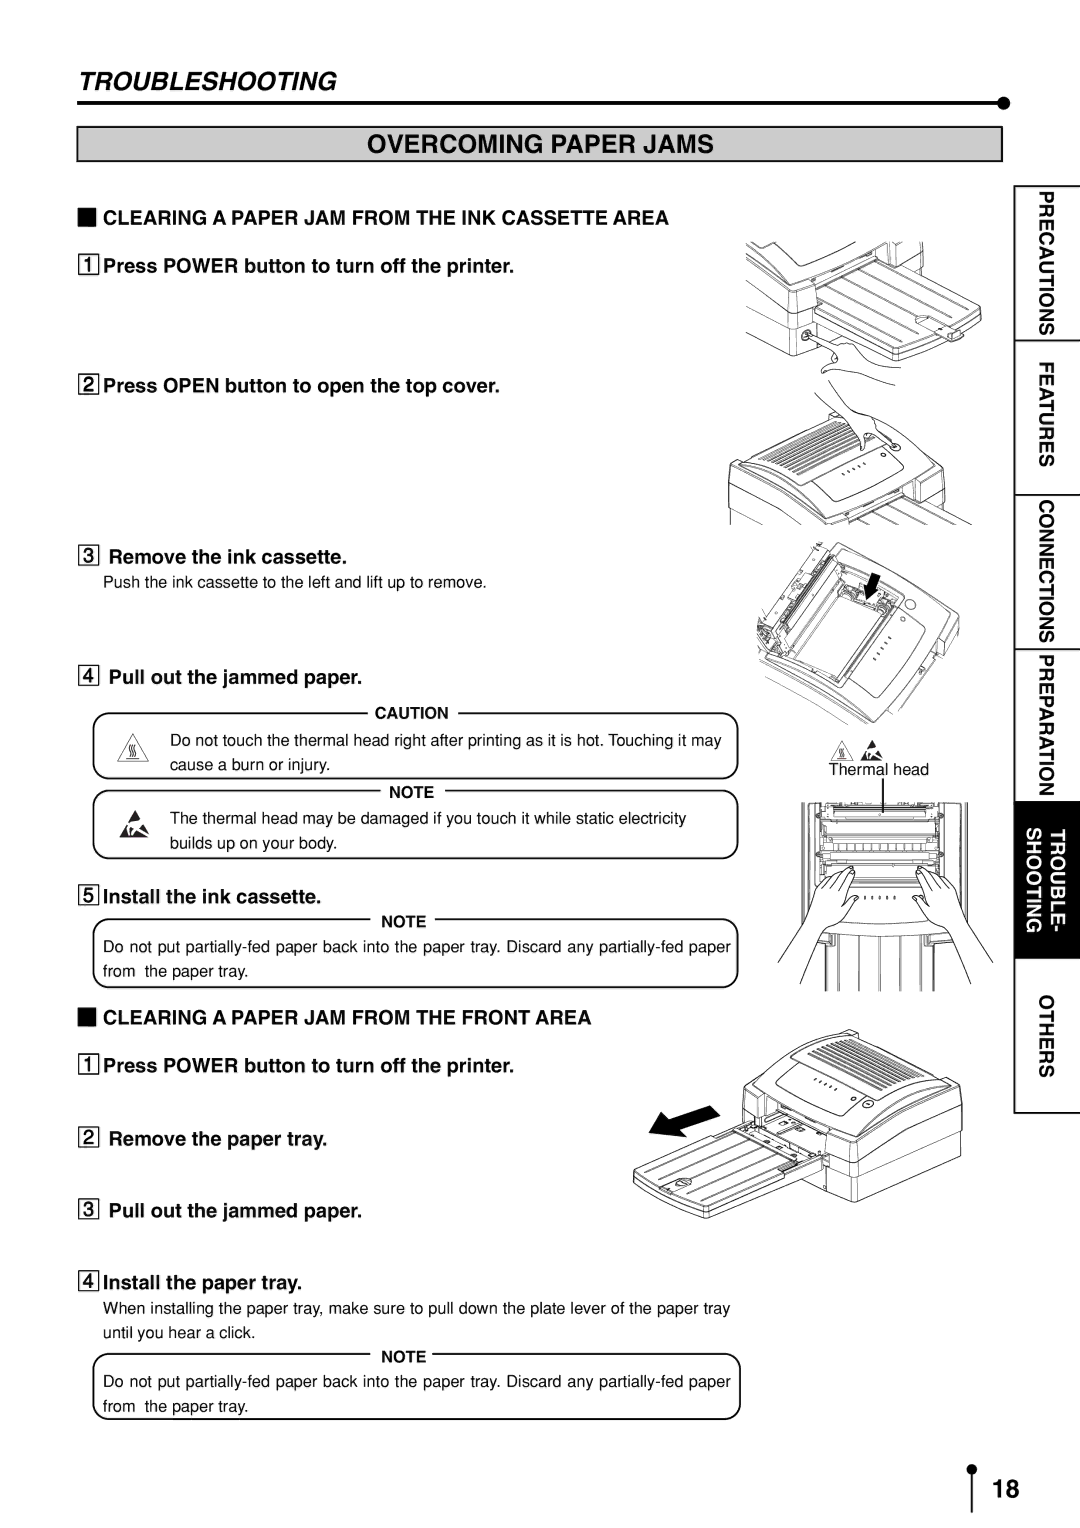 Mitsubishi Electronics CP3020DAE operation manual Overcoming Paper Jams, Clearing a Paper JAM from the INK Cassette Area 